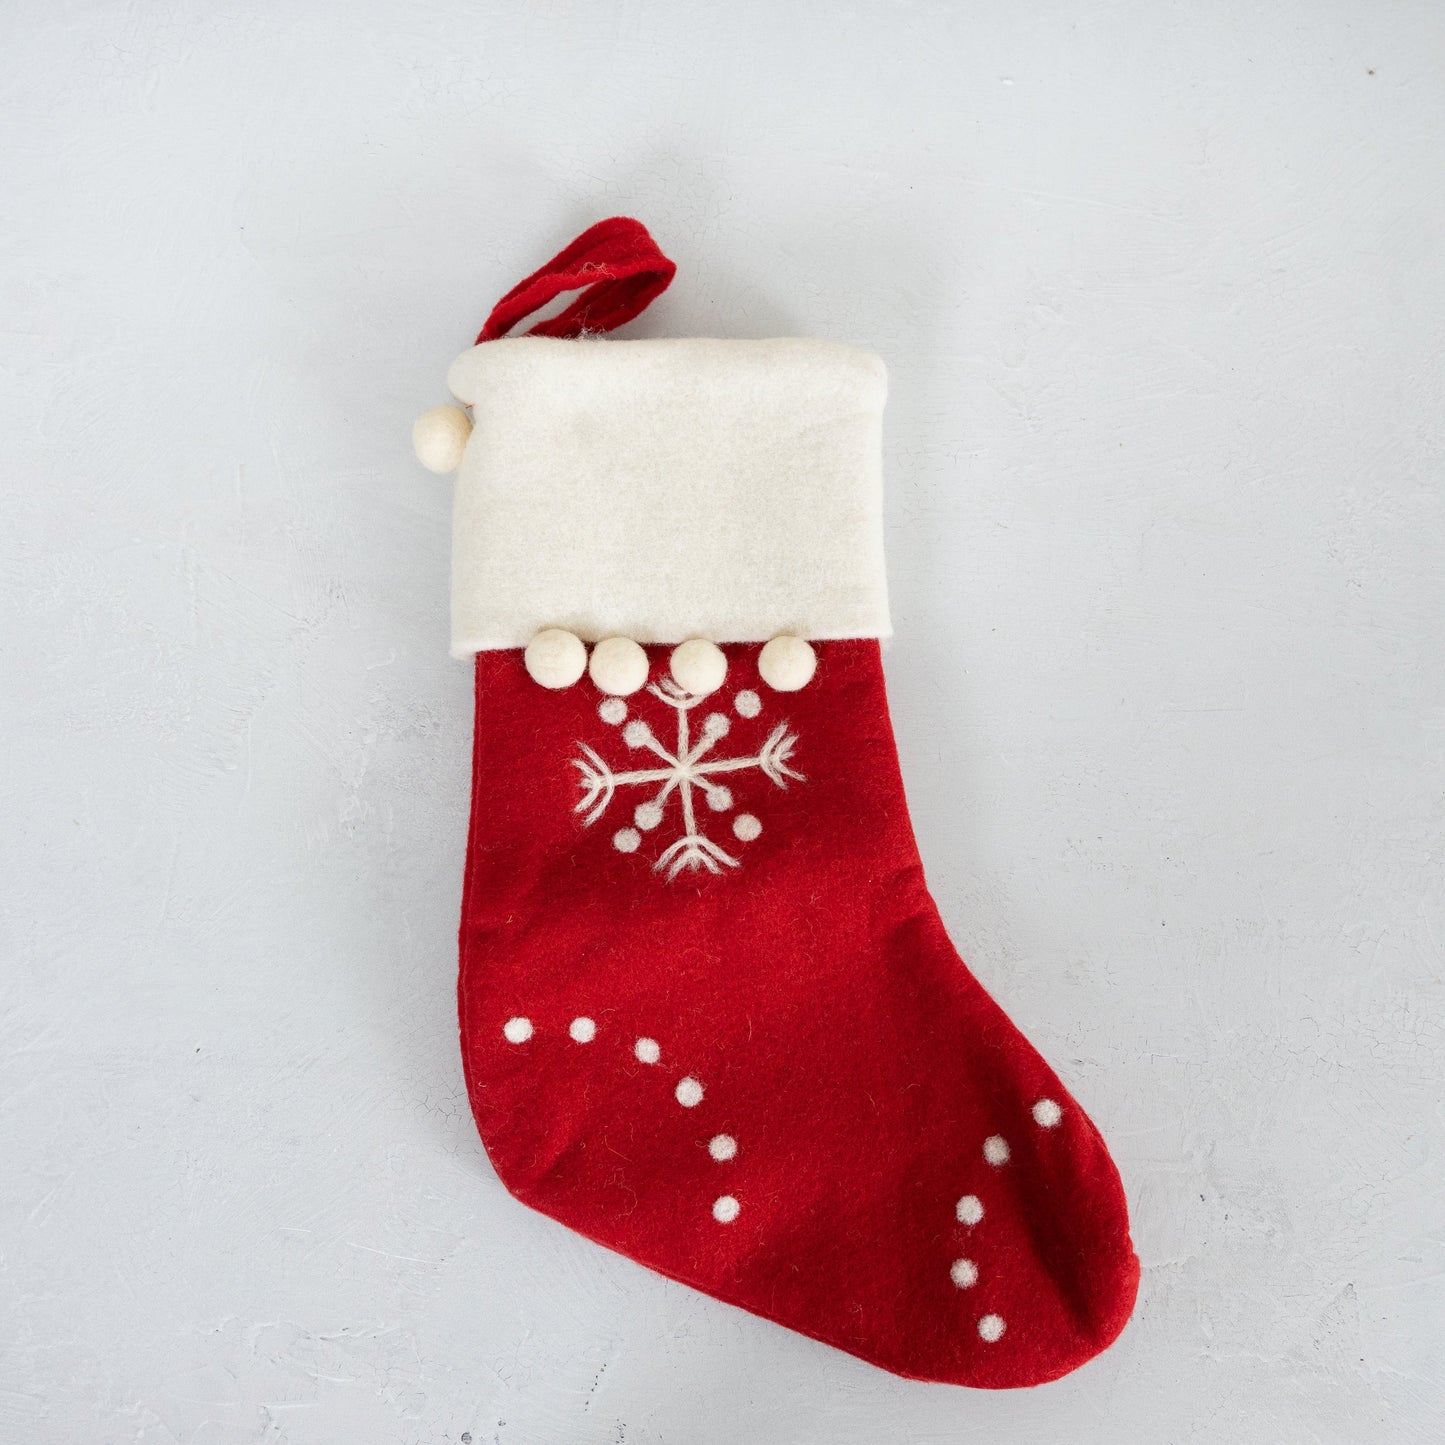 Red Wool Stocking with Snowflake